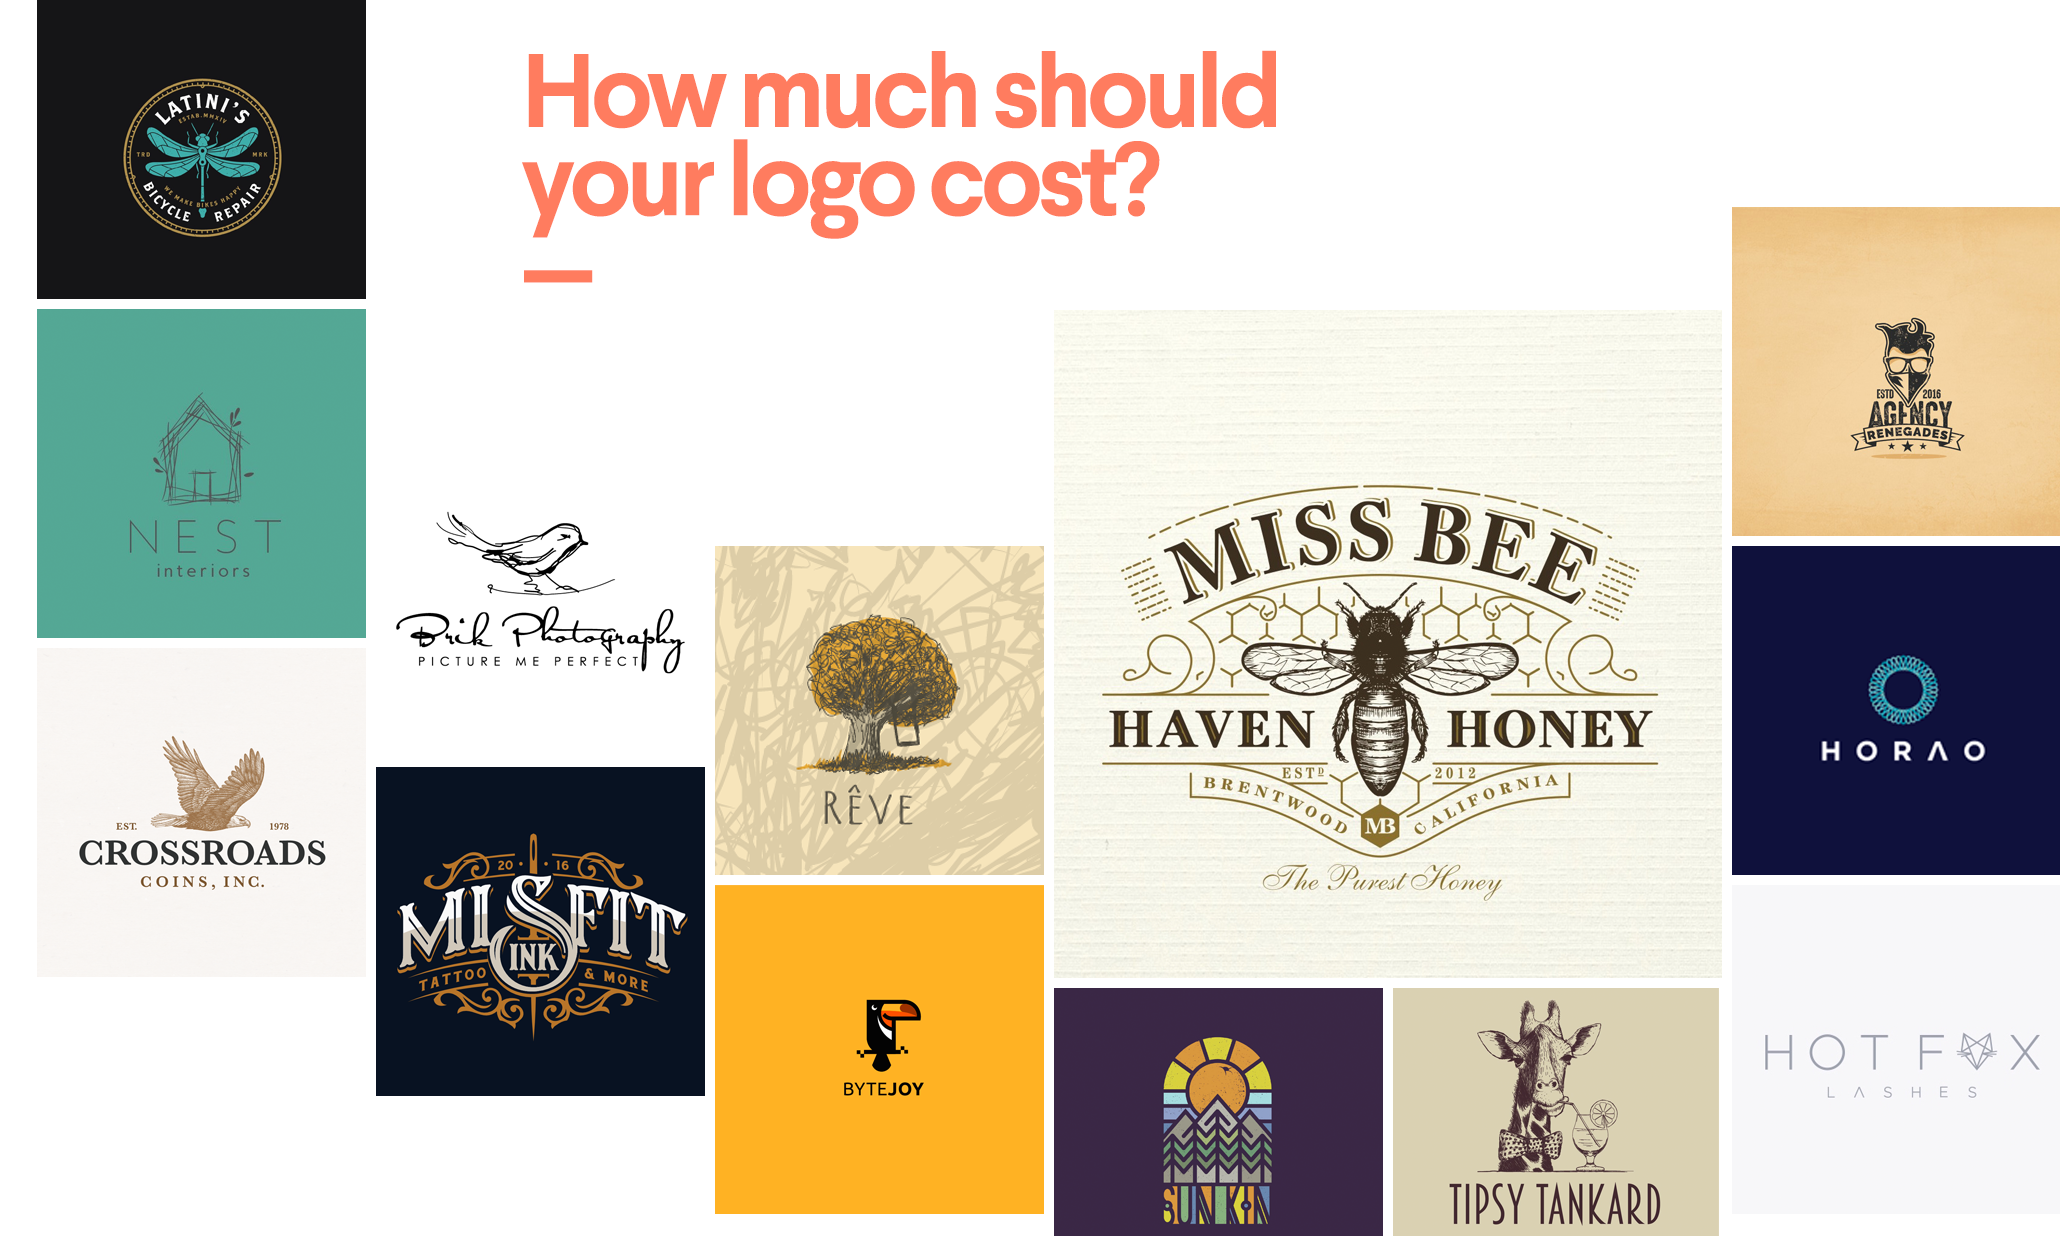 PROFESSIONAL LOGO DESIGN SERVICE FAST DELIVERY QUALITY SERVICE WITHIN 24 HOURS 